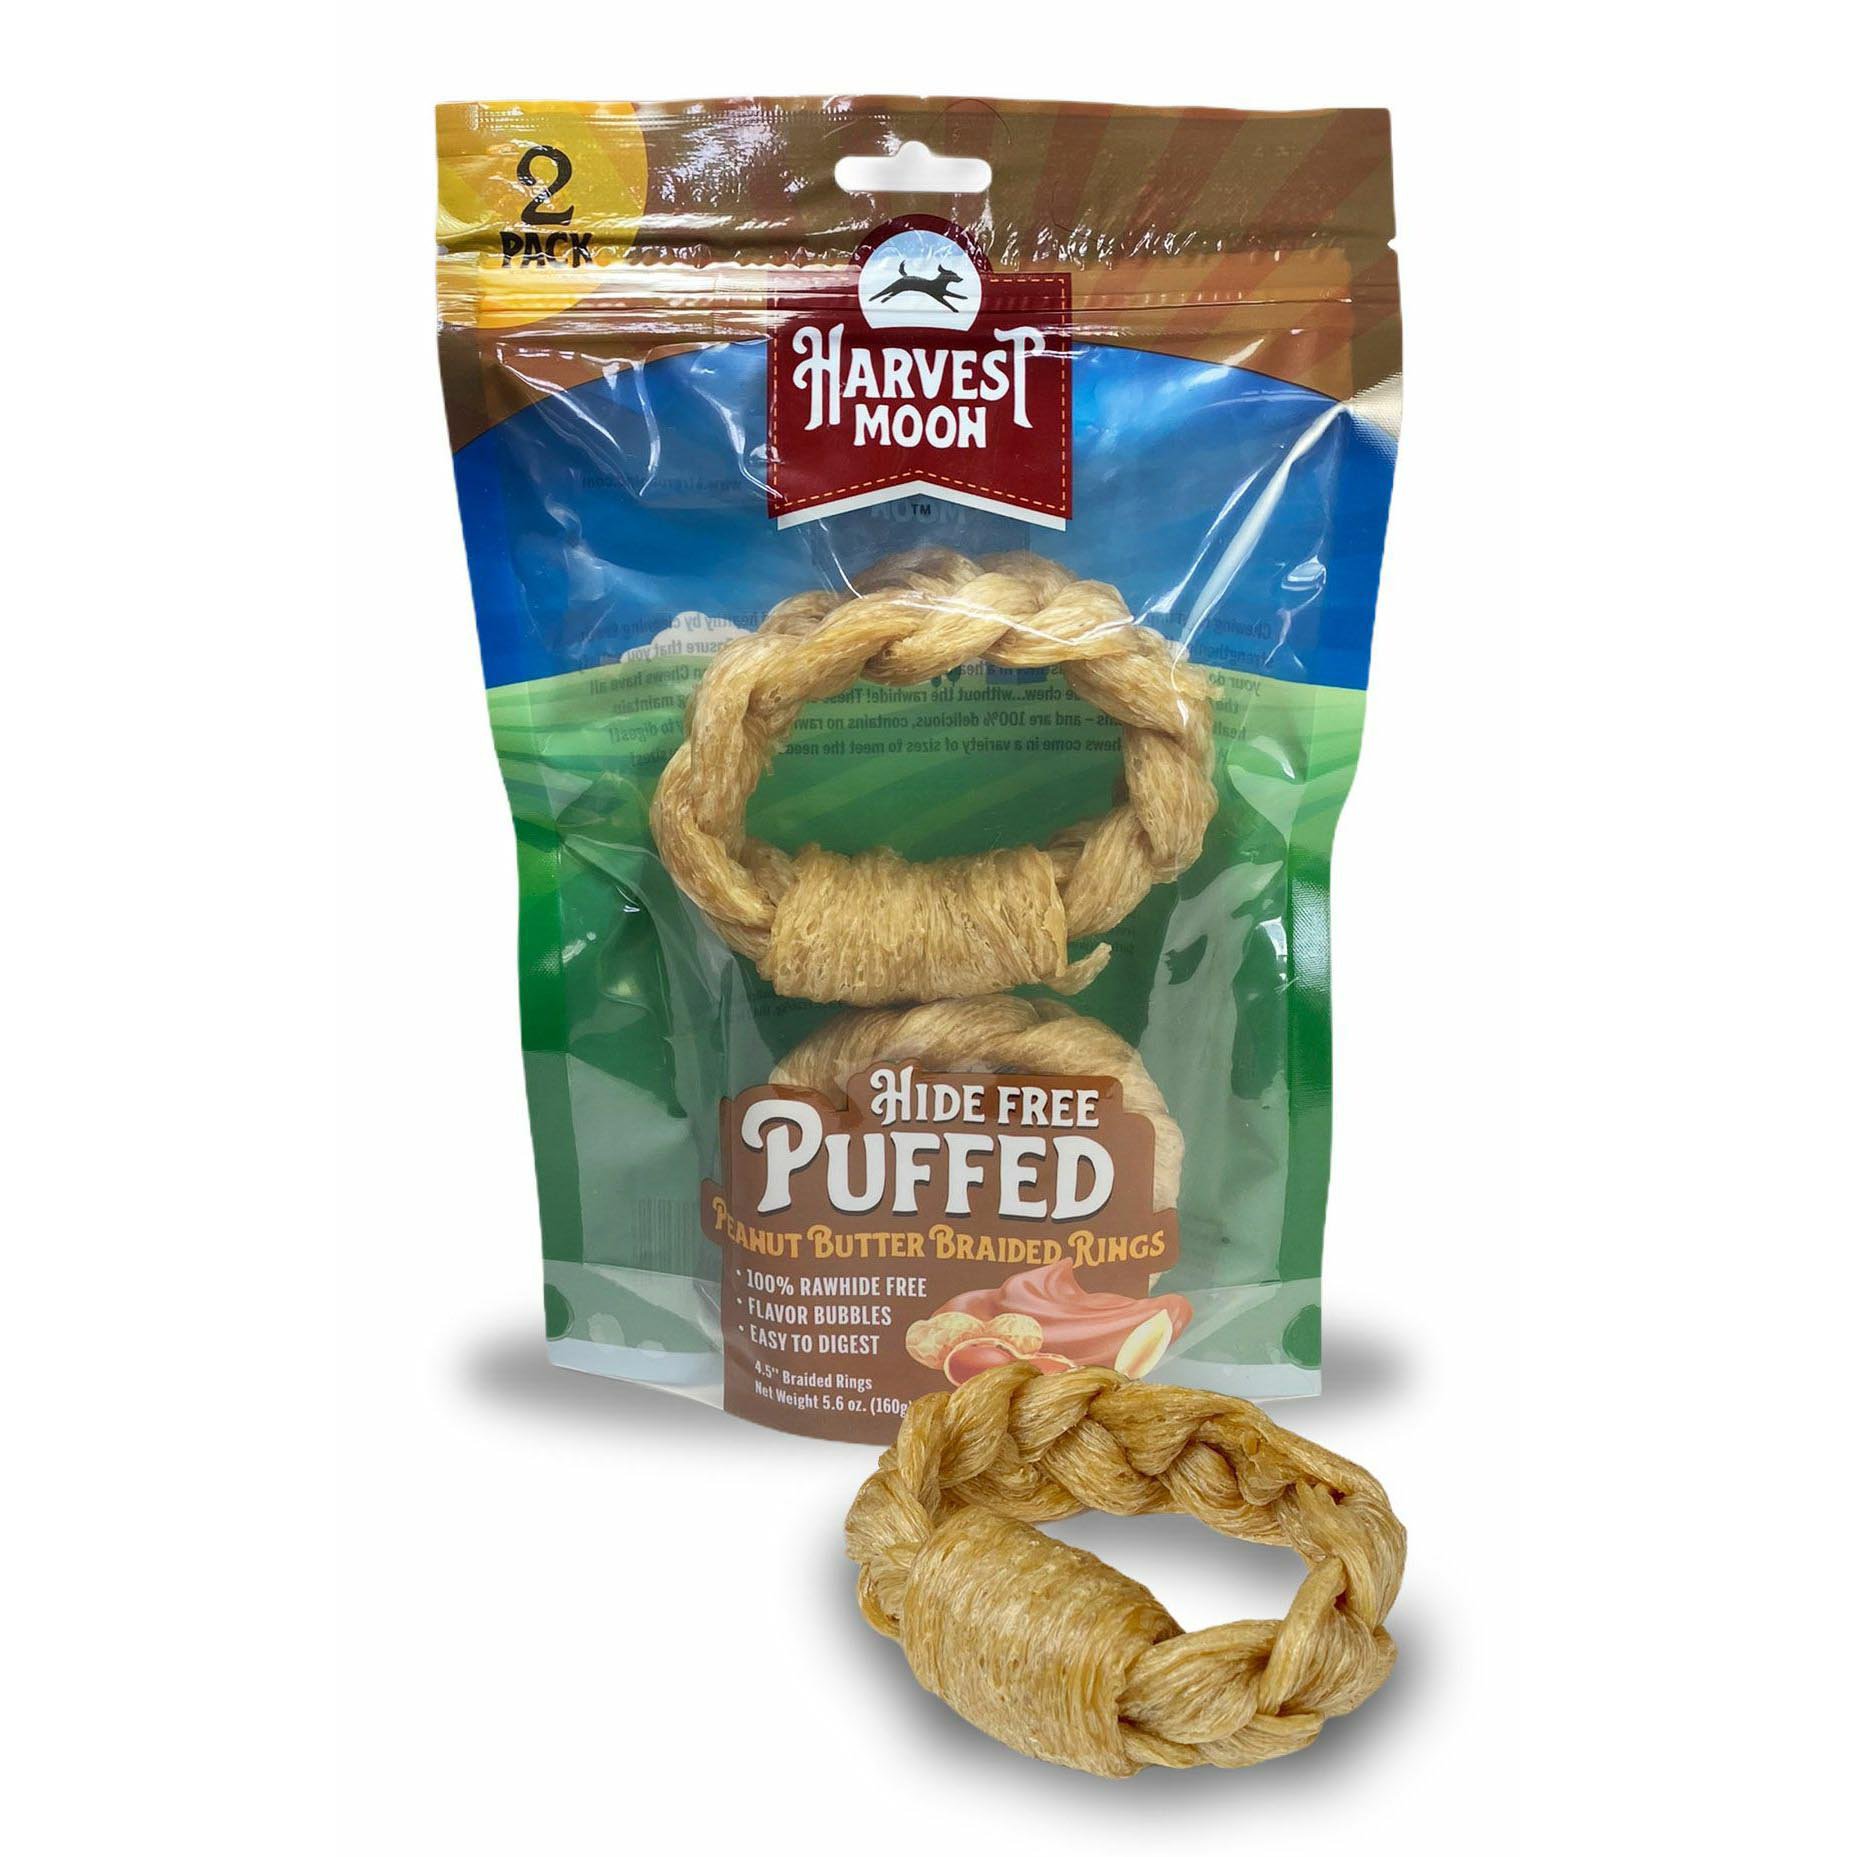 Harvest Moon Peanut Butter Braided Rings H-E-B for Shop Bones Rawhides - Puffed & at Dogs